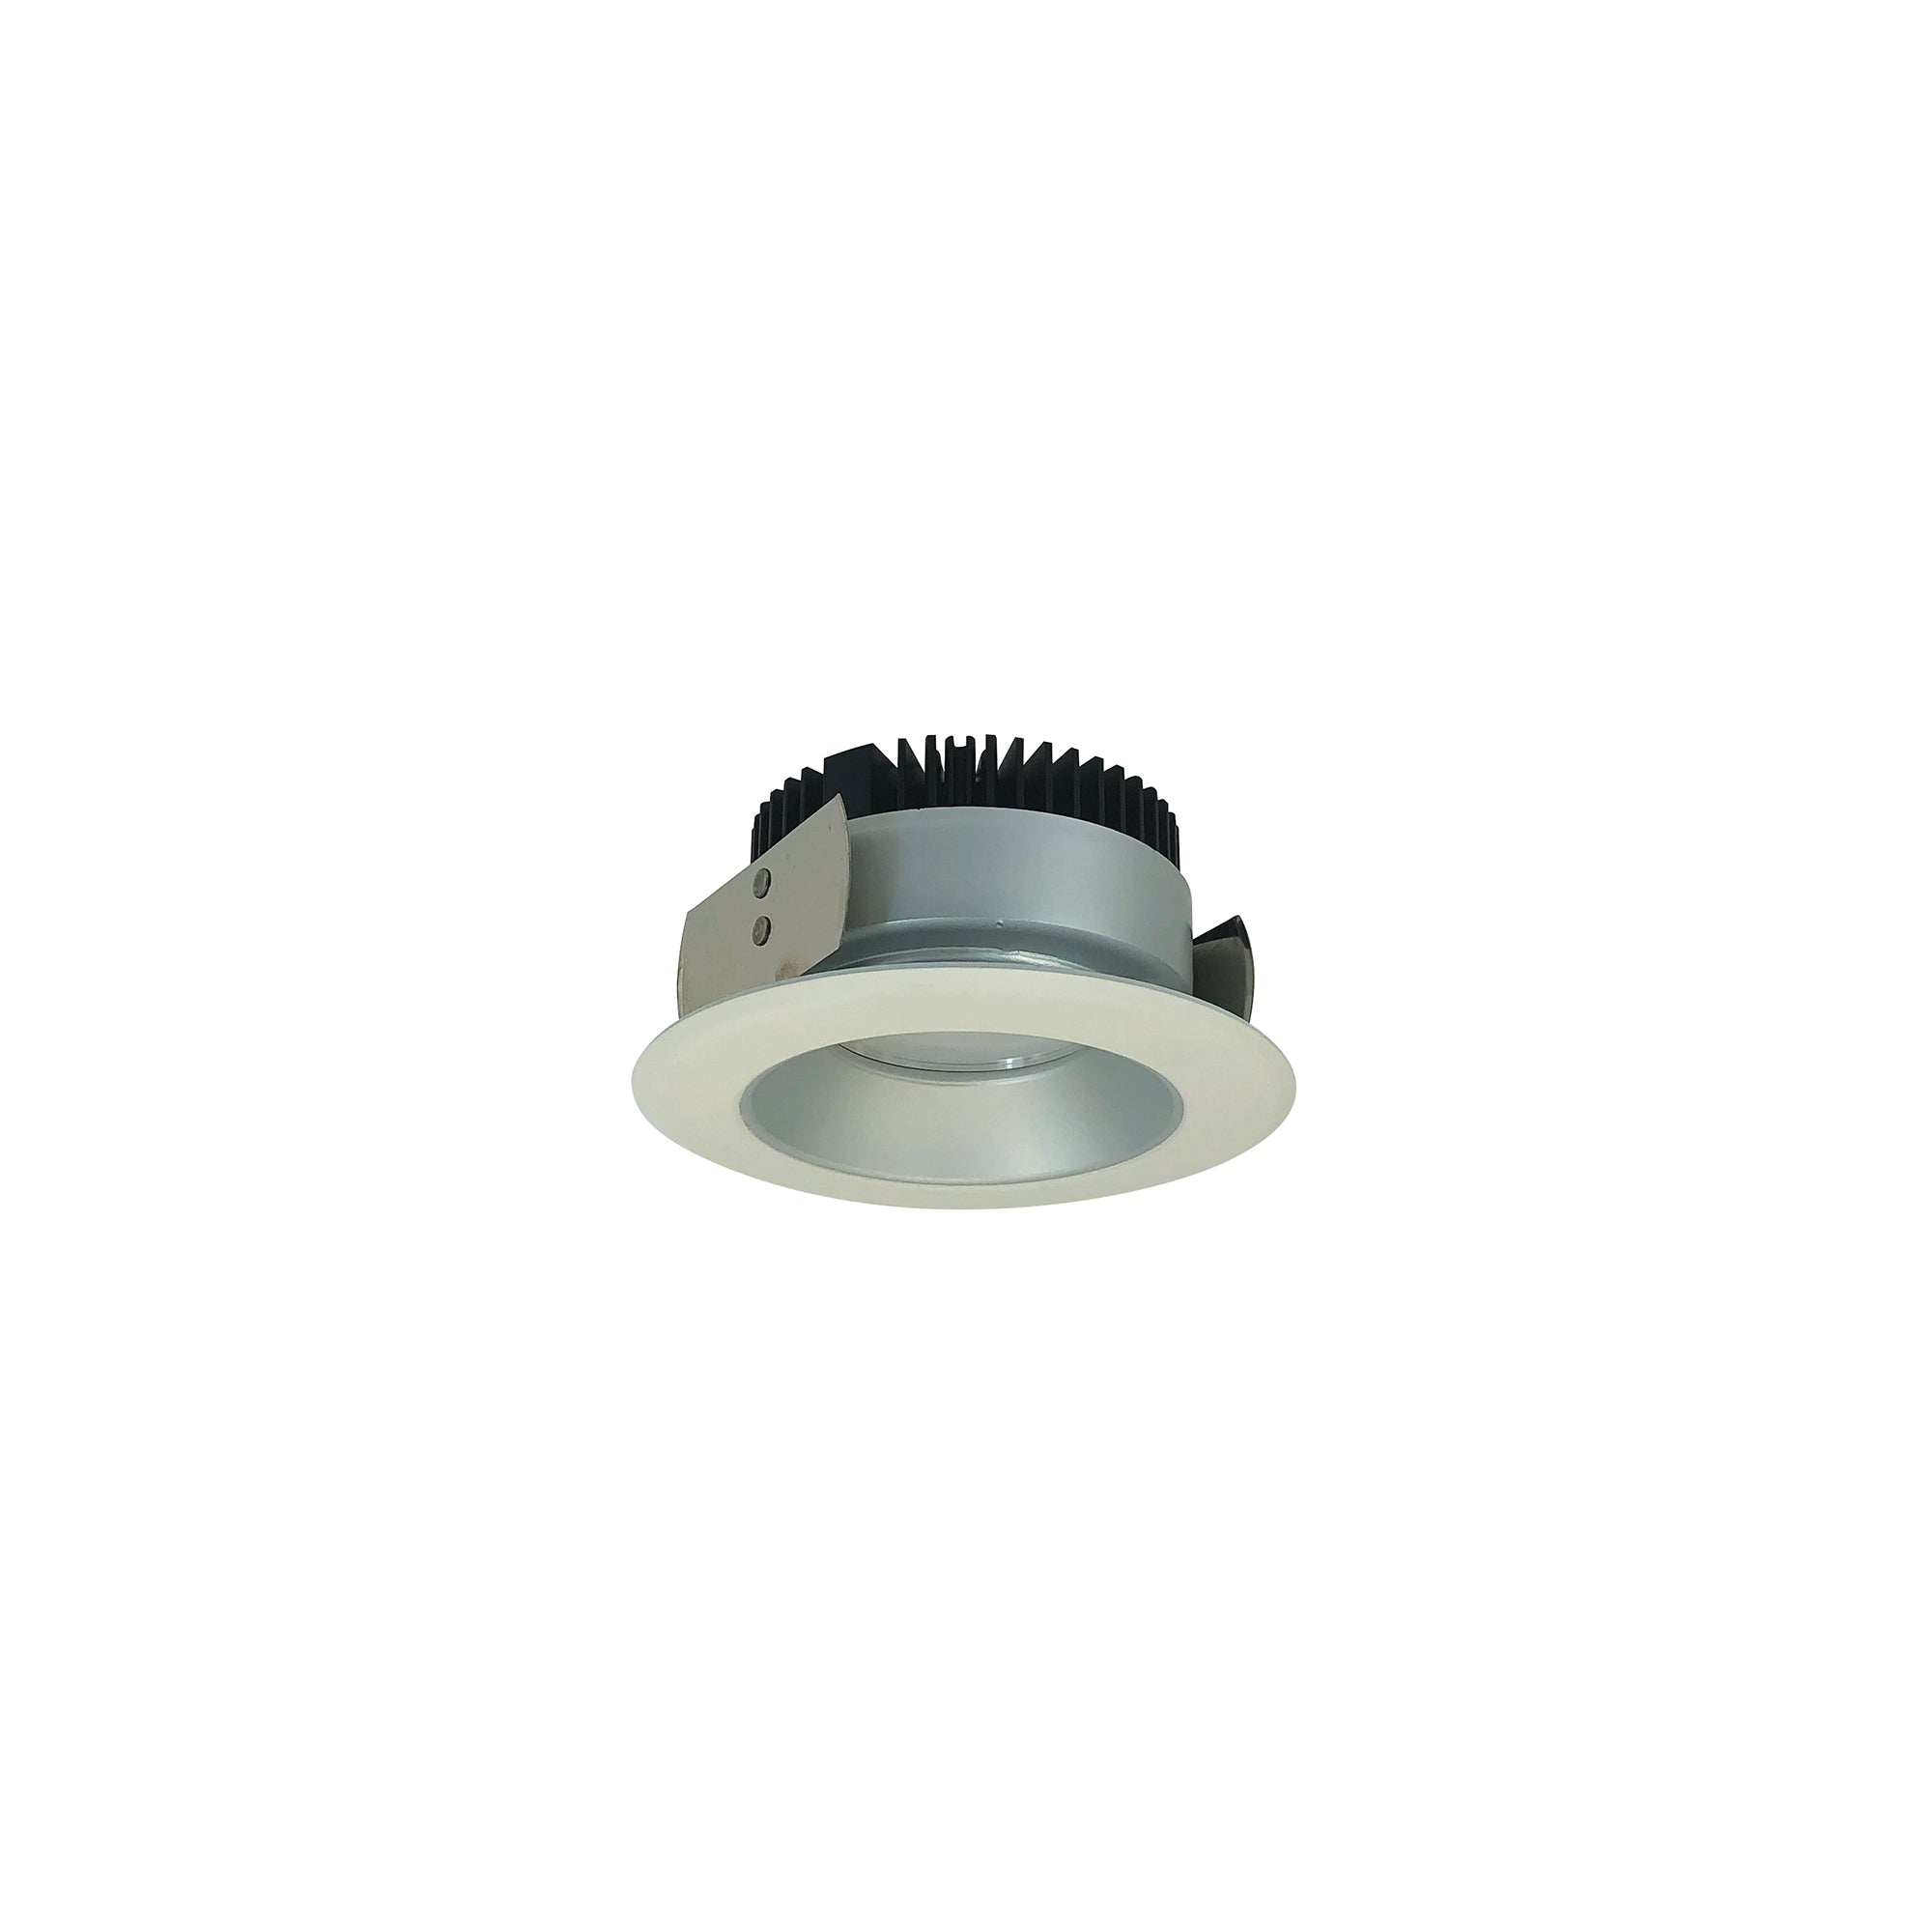 Nora Lighting NRM2-411L0930FHZW - Recessed - 4 Inch Marquise II Round Reflector, 900lm, 3000K, Flood, Haze/White